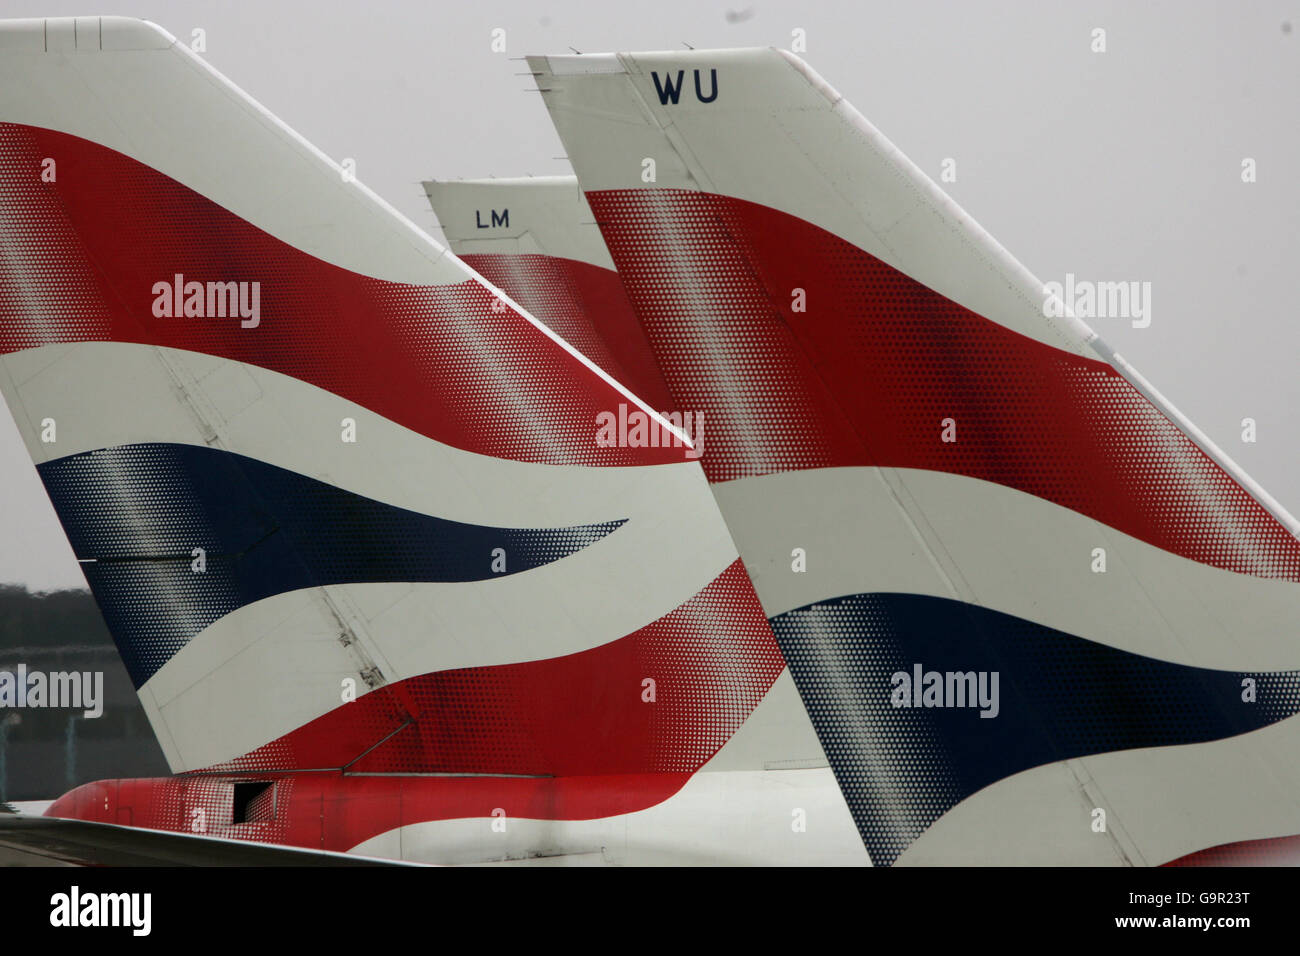 Generic transport pics. The tail fins of British Airways' aircraft parked at Terminal Four of London's Heathrow Airport. Stock Photo